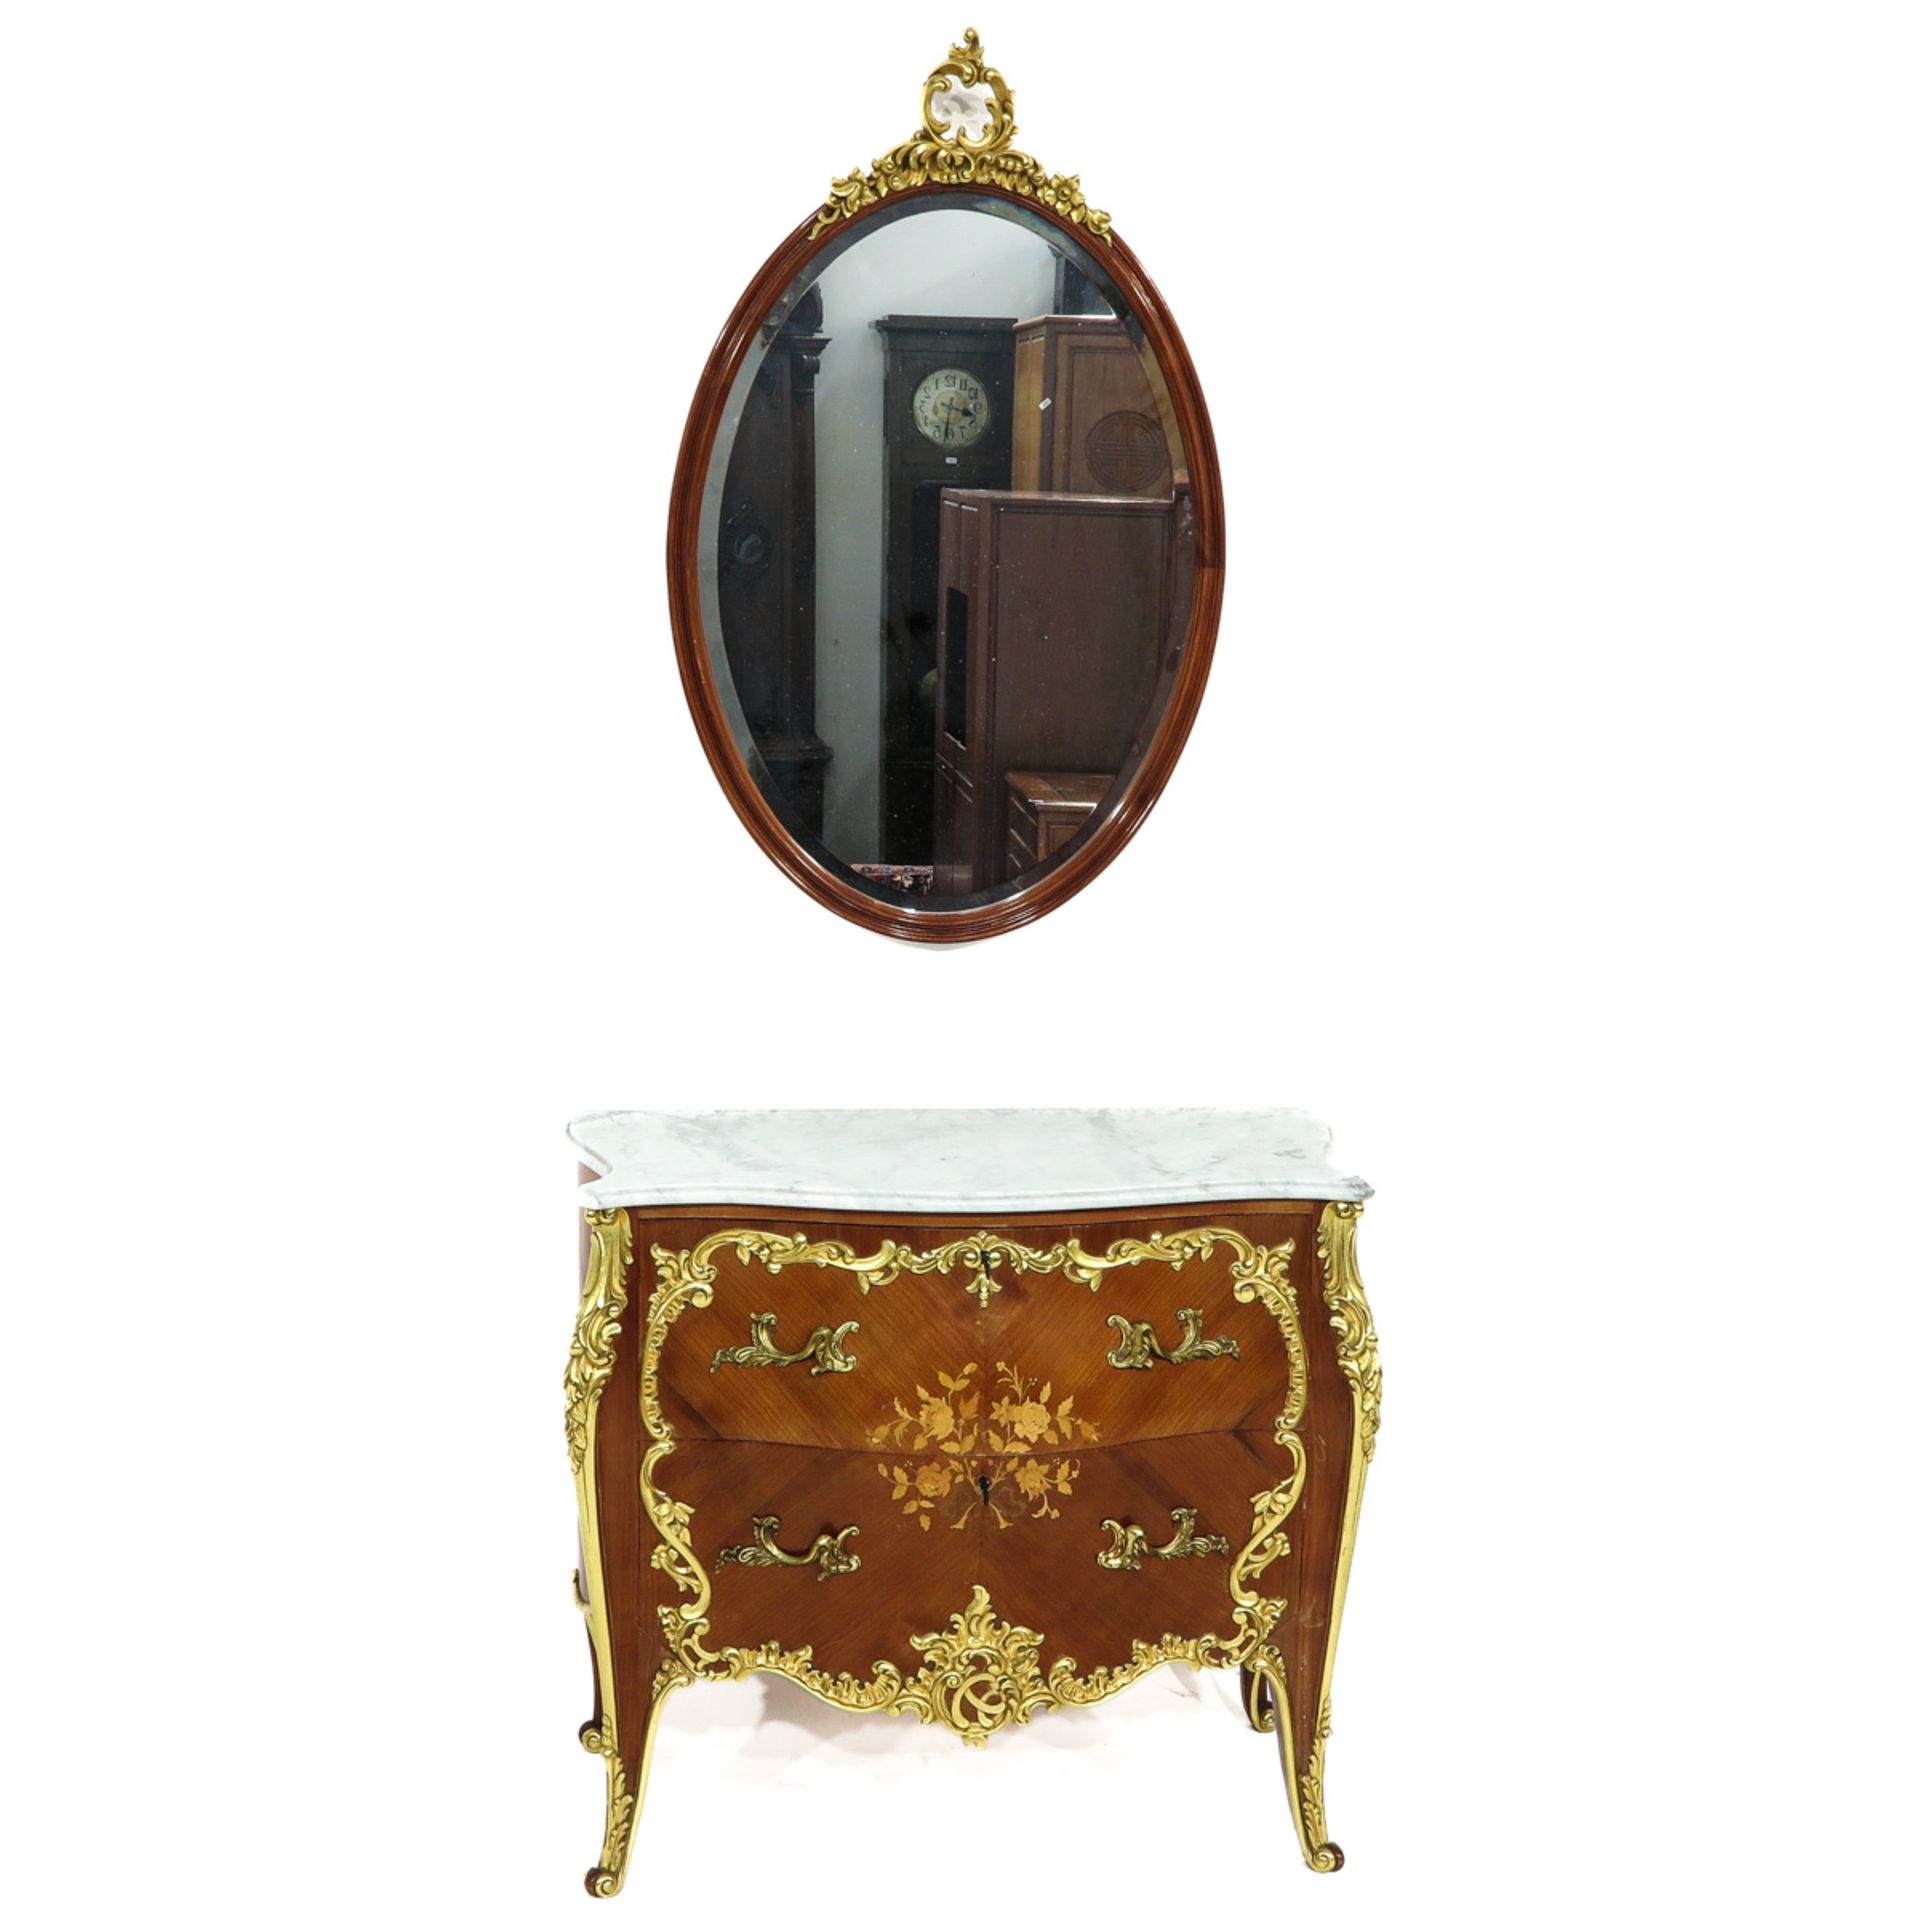 A Mirror and Commode